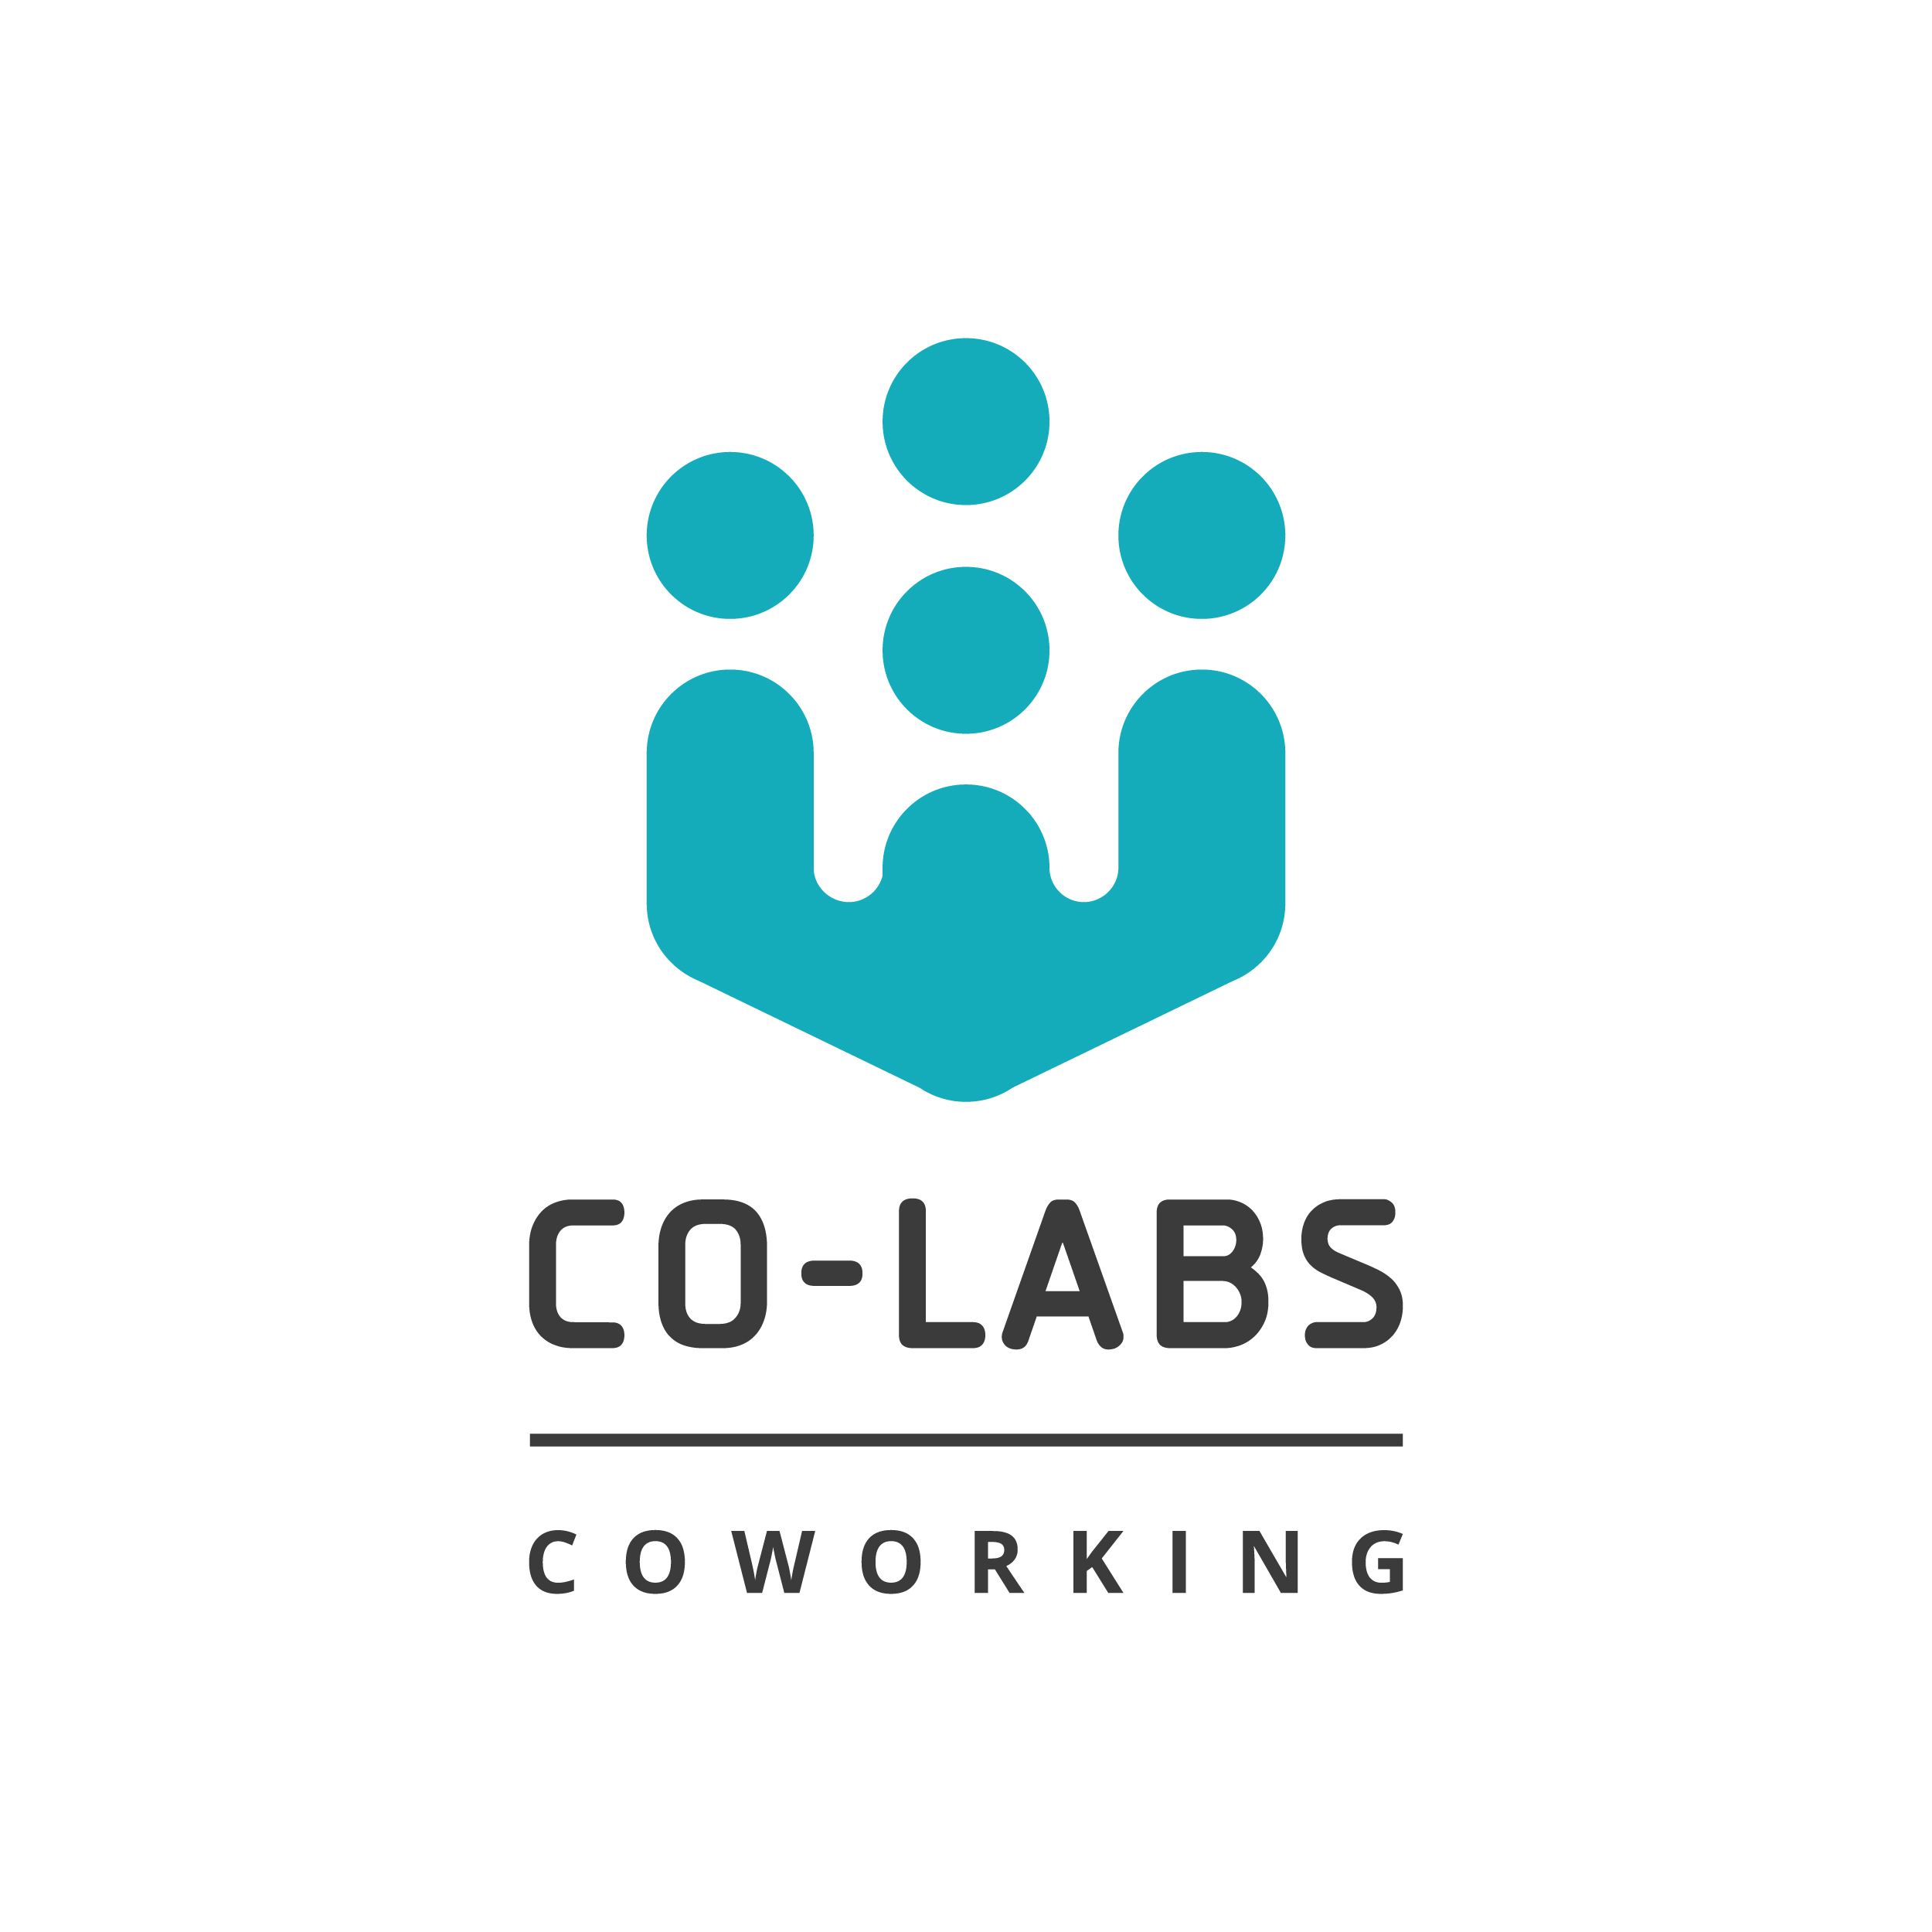 CO-LABS COWORKING